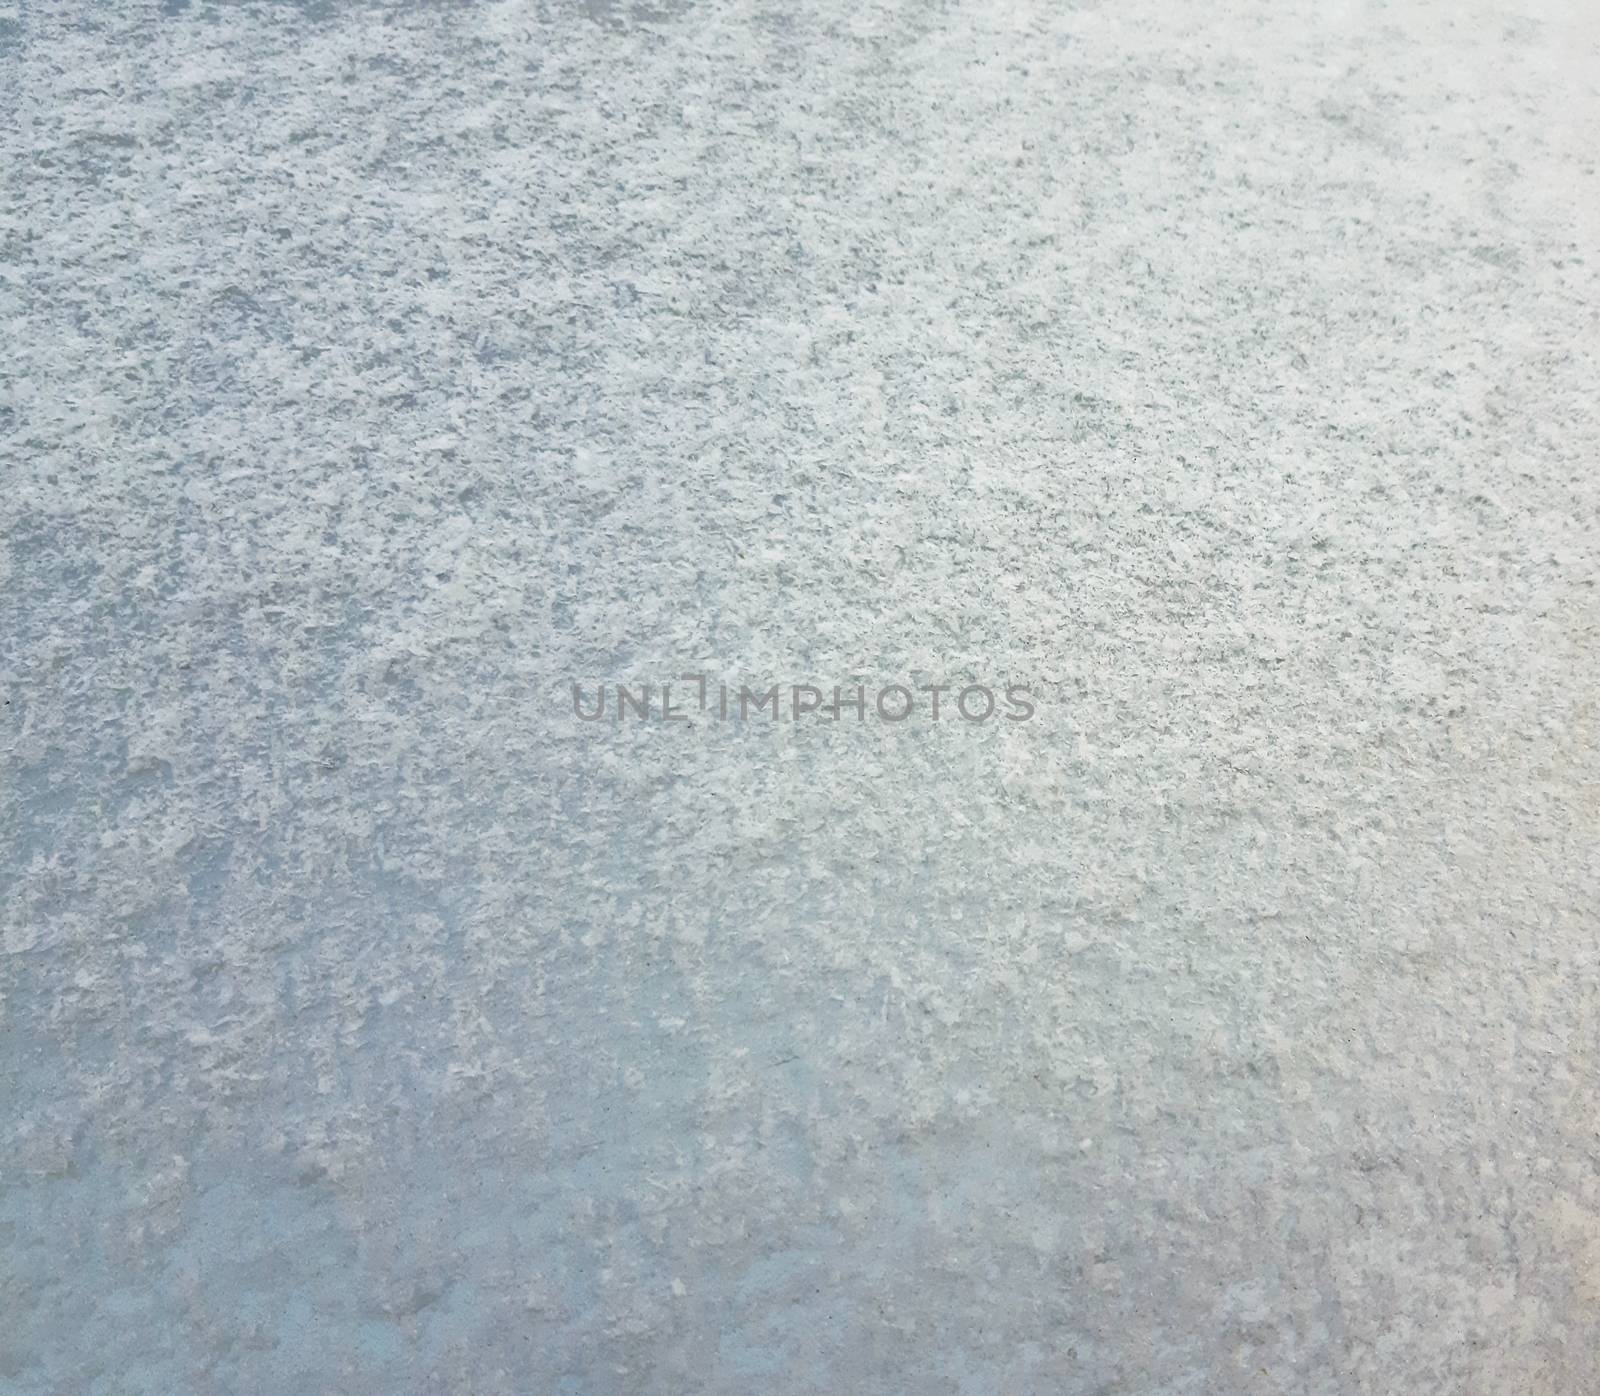 Snowy texture on the hood of a car by Mindru